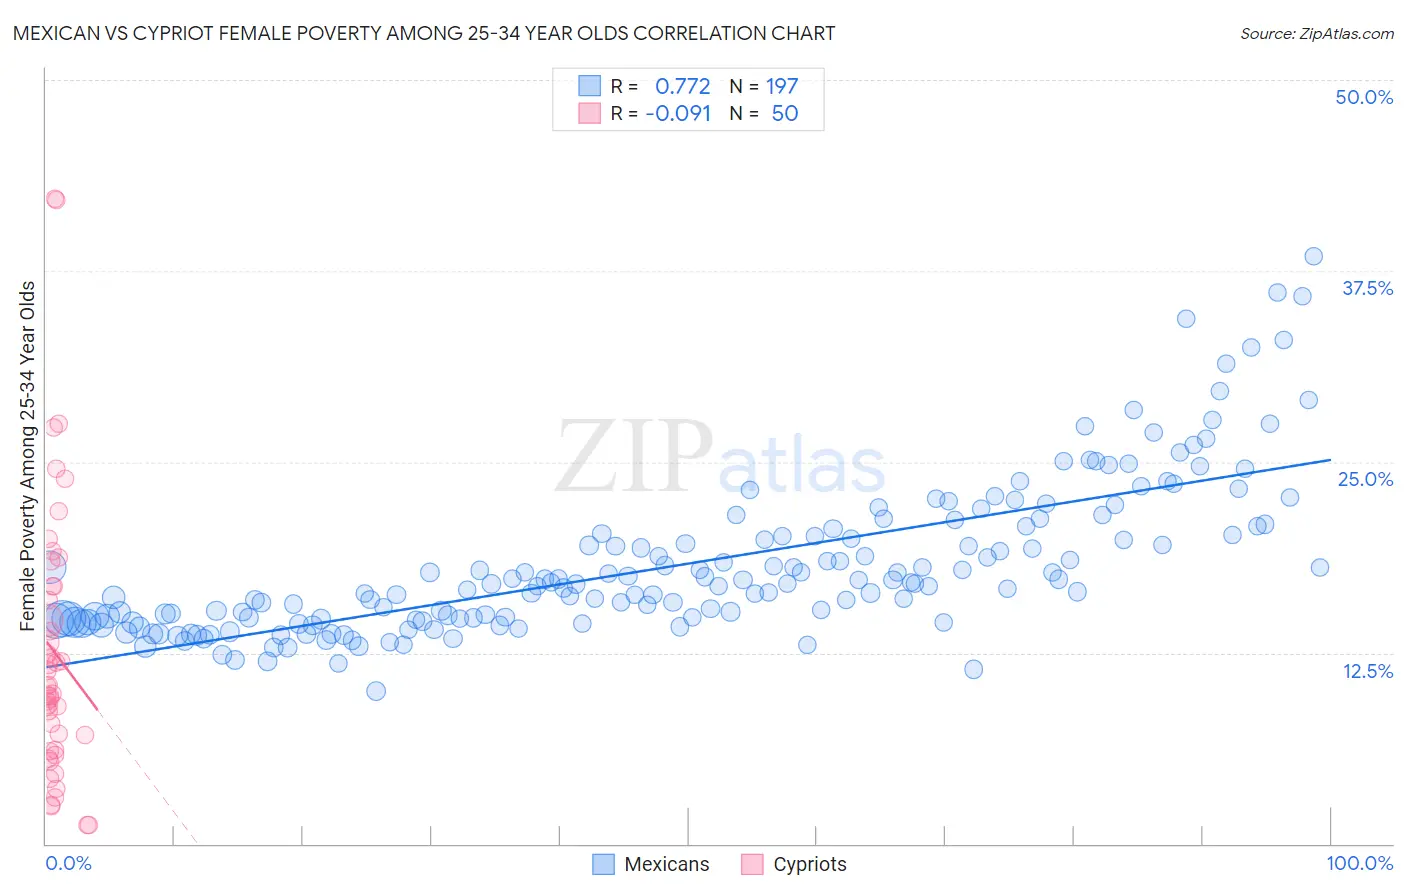 Mexican vs Cypriot Female Poverty Among 25-34 Year Olds